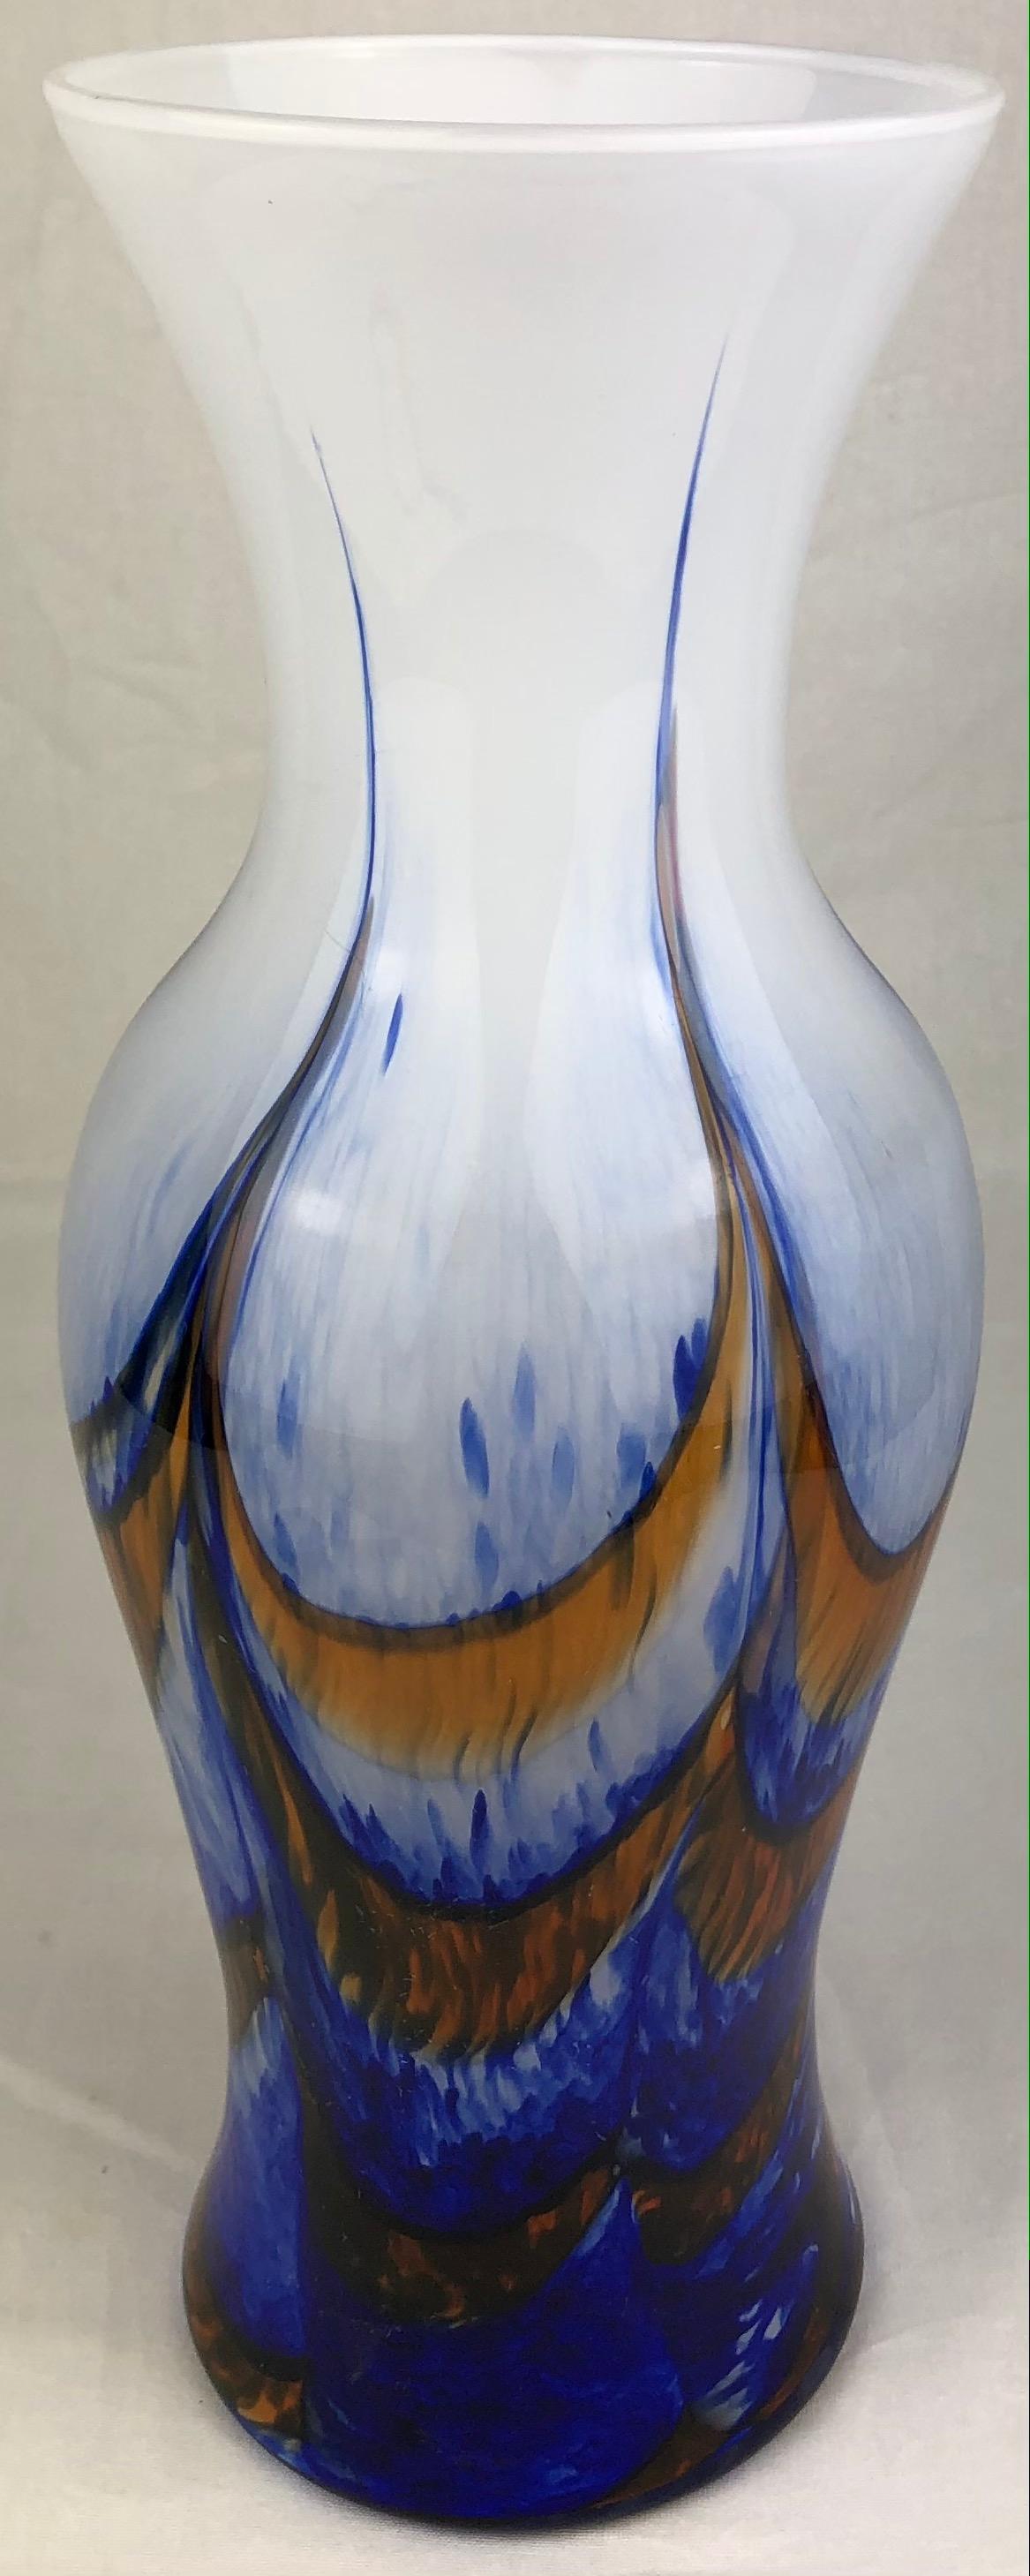 A white, blue and orange variegated tall art glass vase perfect as a center piece on a dining or side table. French Art Deco transition period, attributed to Schneider Glassworks. White background with beautiful blue and orange swirl motifs.